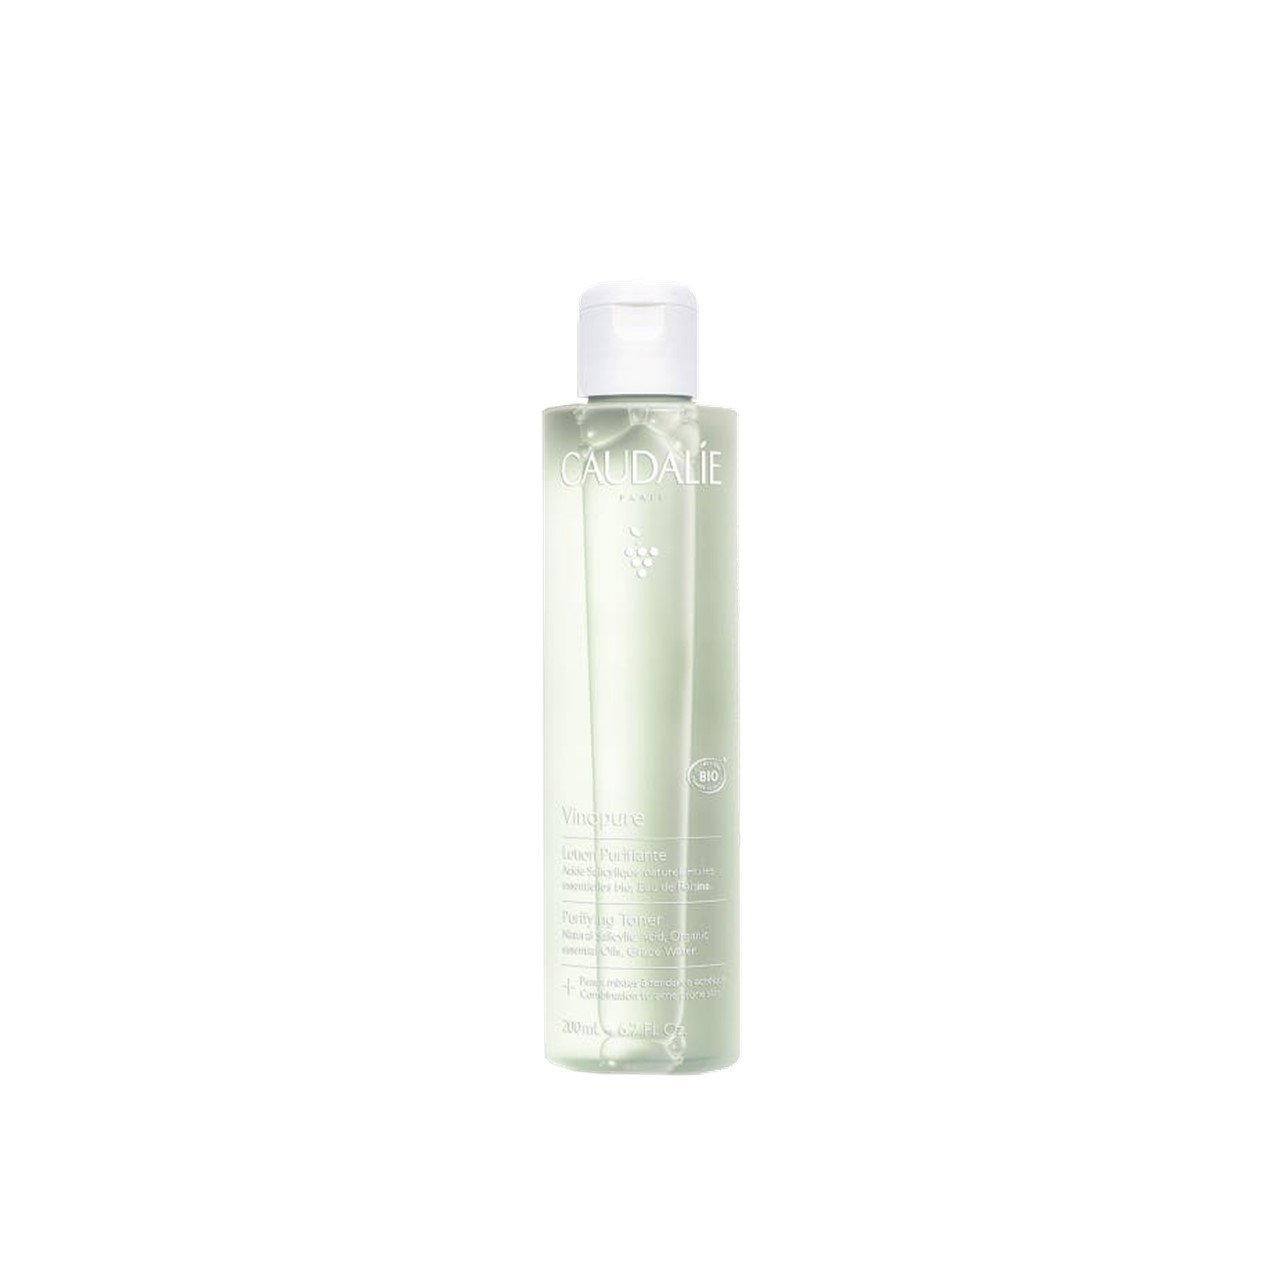 Vinopure Purifying Cleansing Gel for Oily Skin- United States